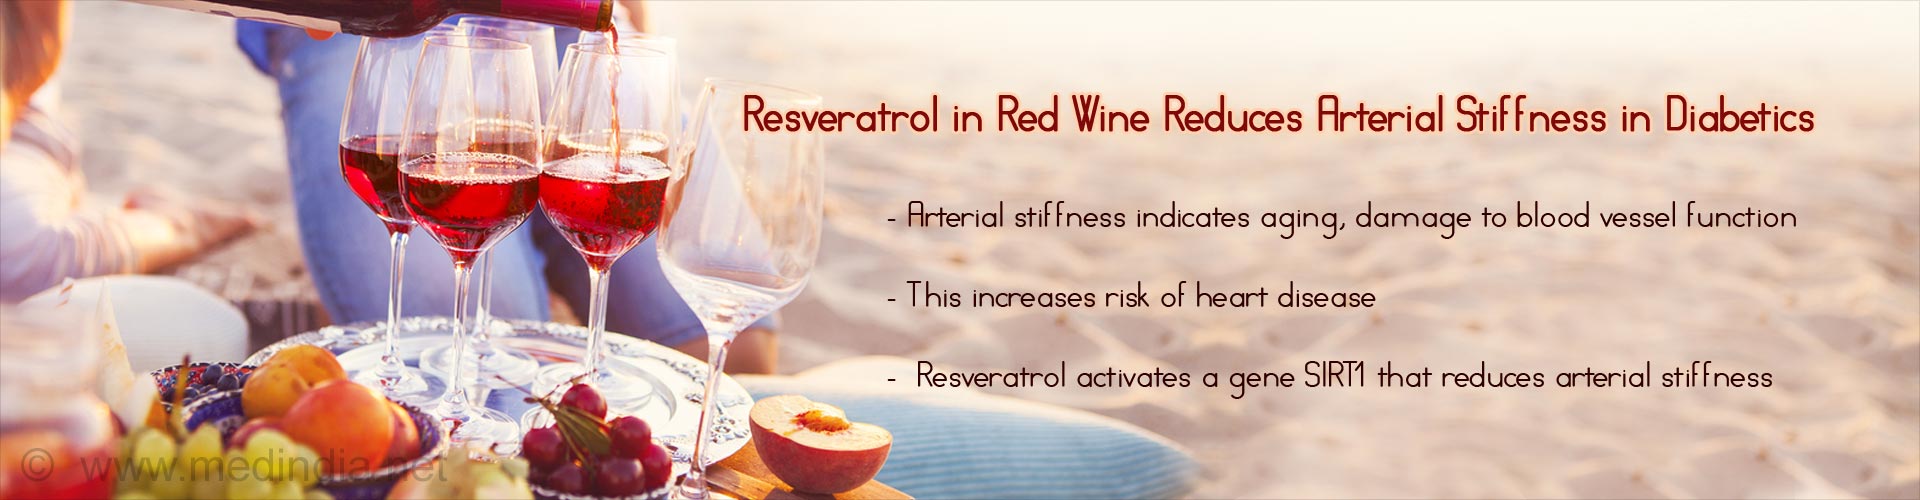 resveratrol in red wine reduces arterial stiffness in diabetics
- arterial stiffness indicates aging, damage to blood vessel function
- this increases risk of heart disease
- resveratrol activates a gene SIRT1 that reduces arterial stiffness